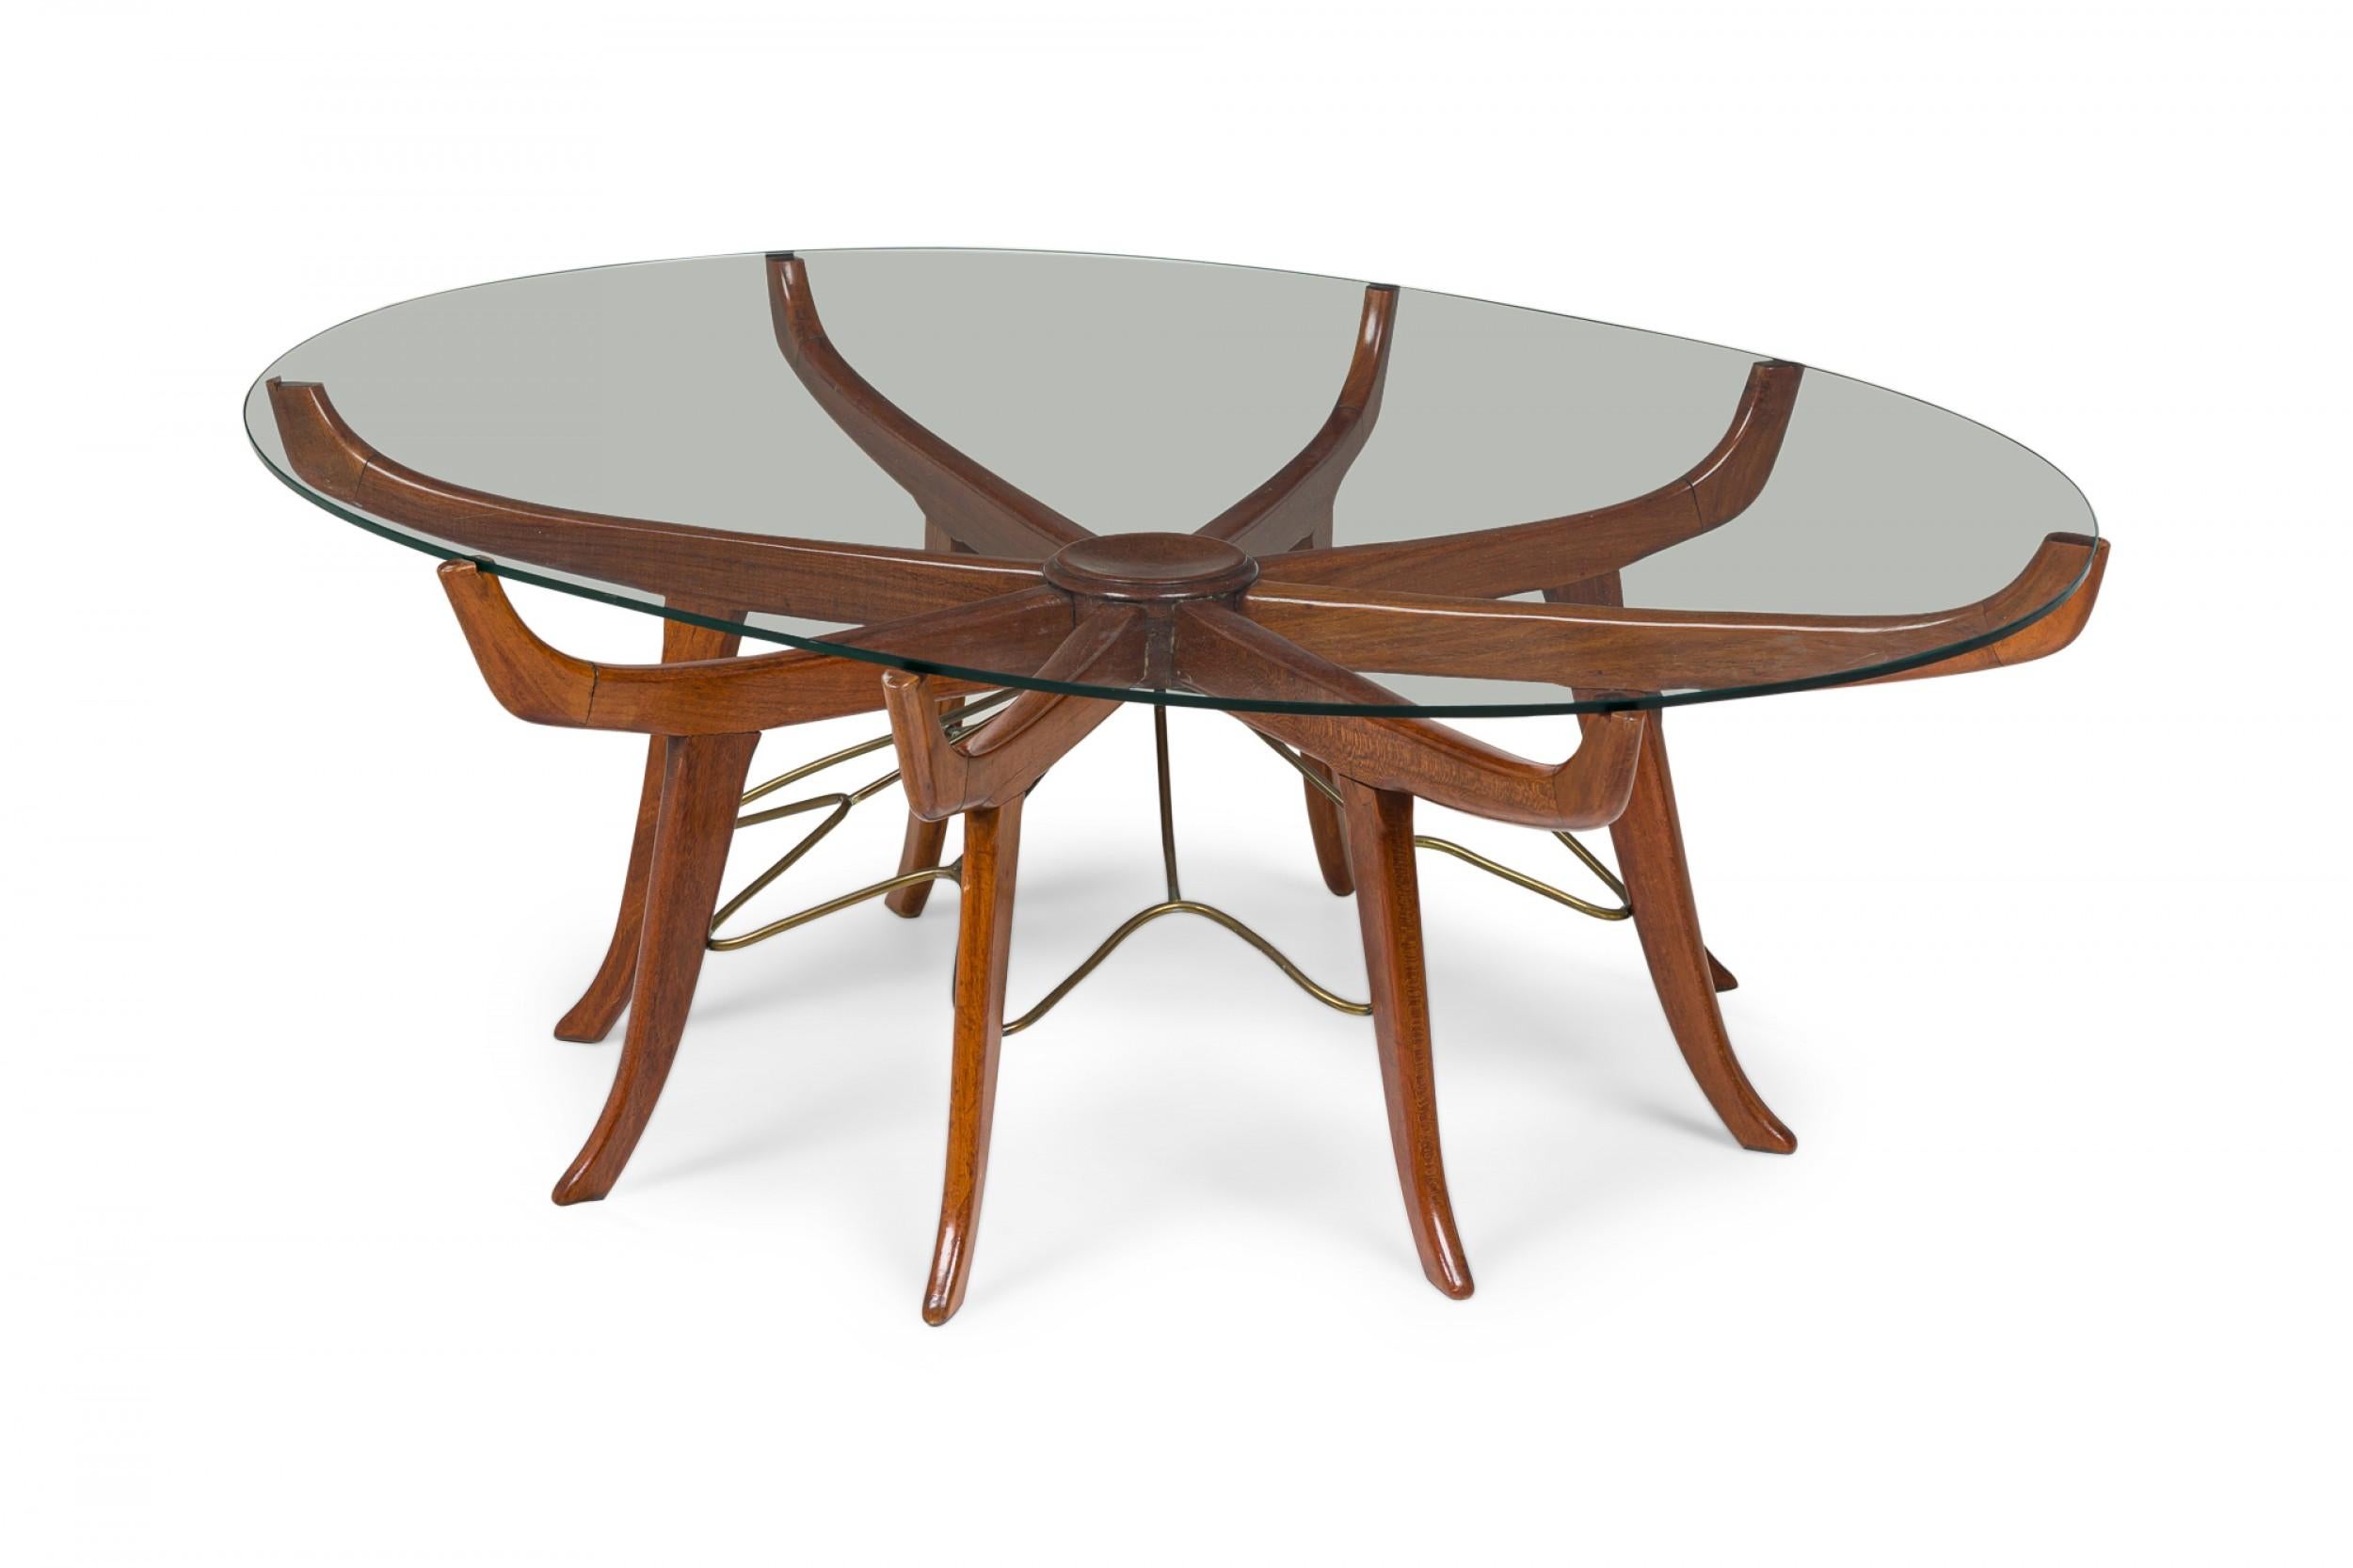 Midcentury (1950s) Italian Modern mahogany, steel and glass oval coffee table (Attributed to Carlo de Carli).